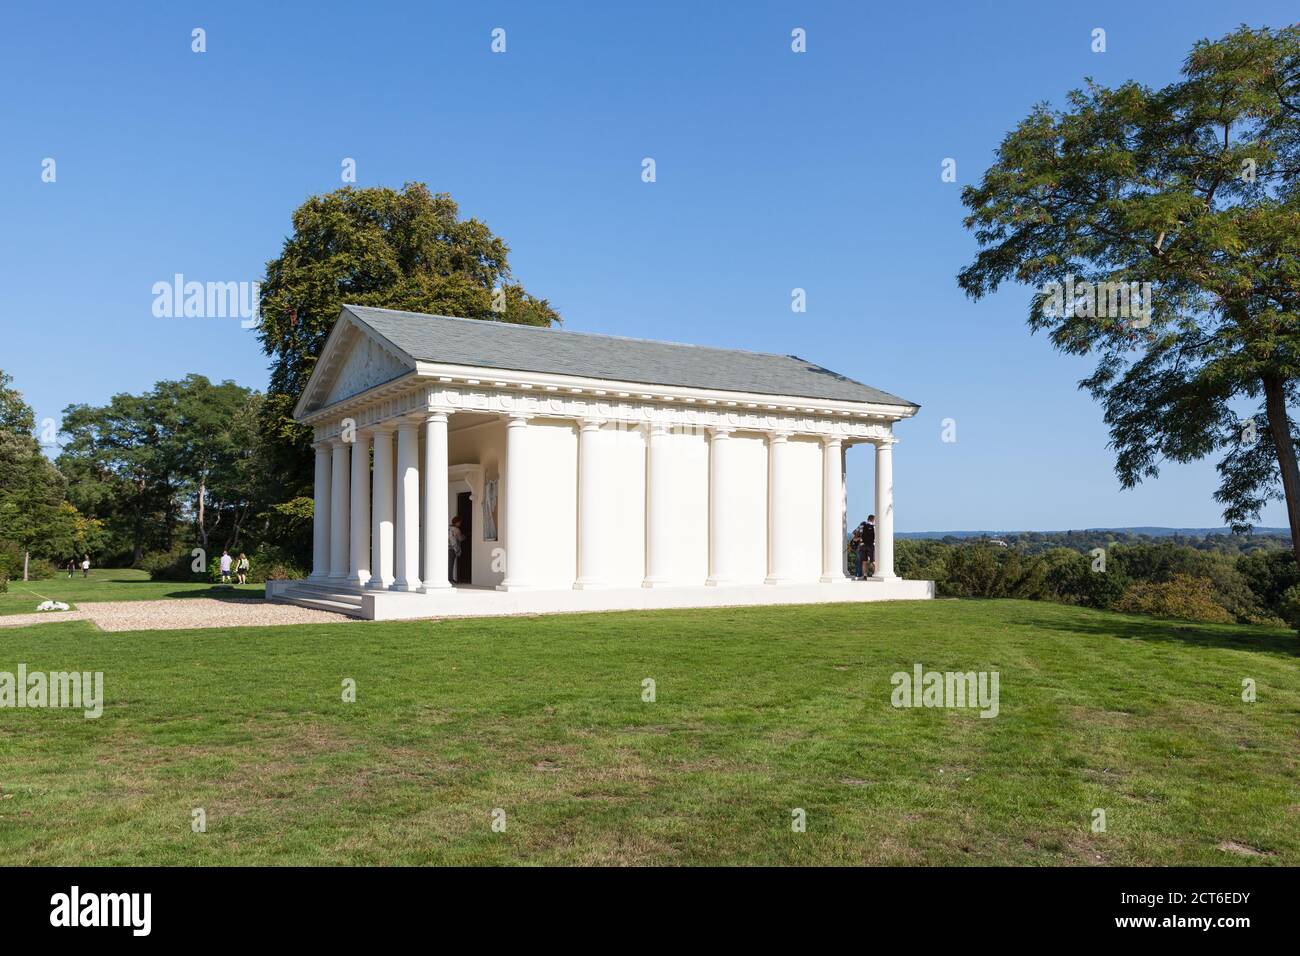 The Temple of Bacchus at Painshill Park, an 18th century English landscape garden in Surrey. Stock Photo